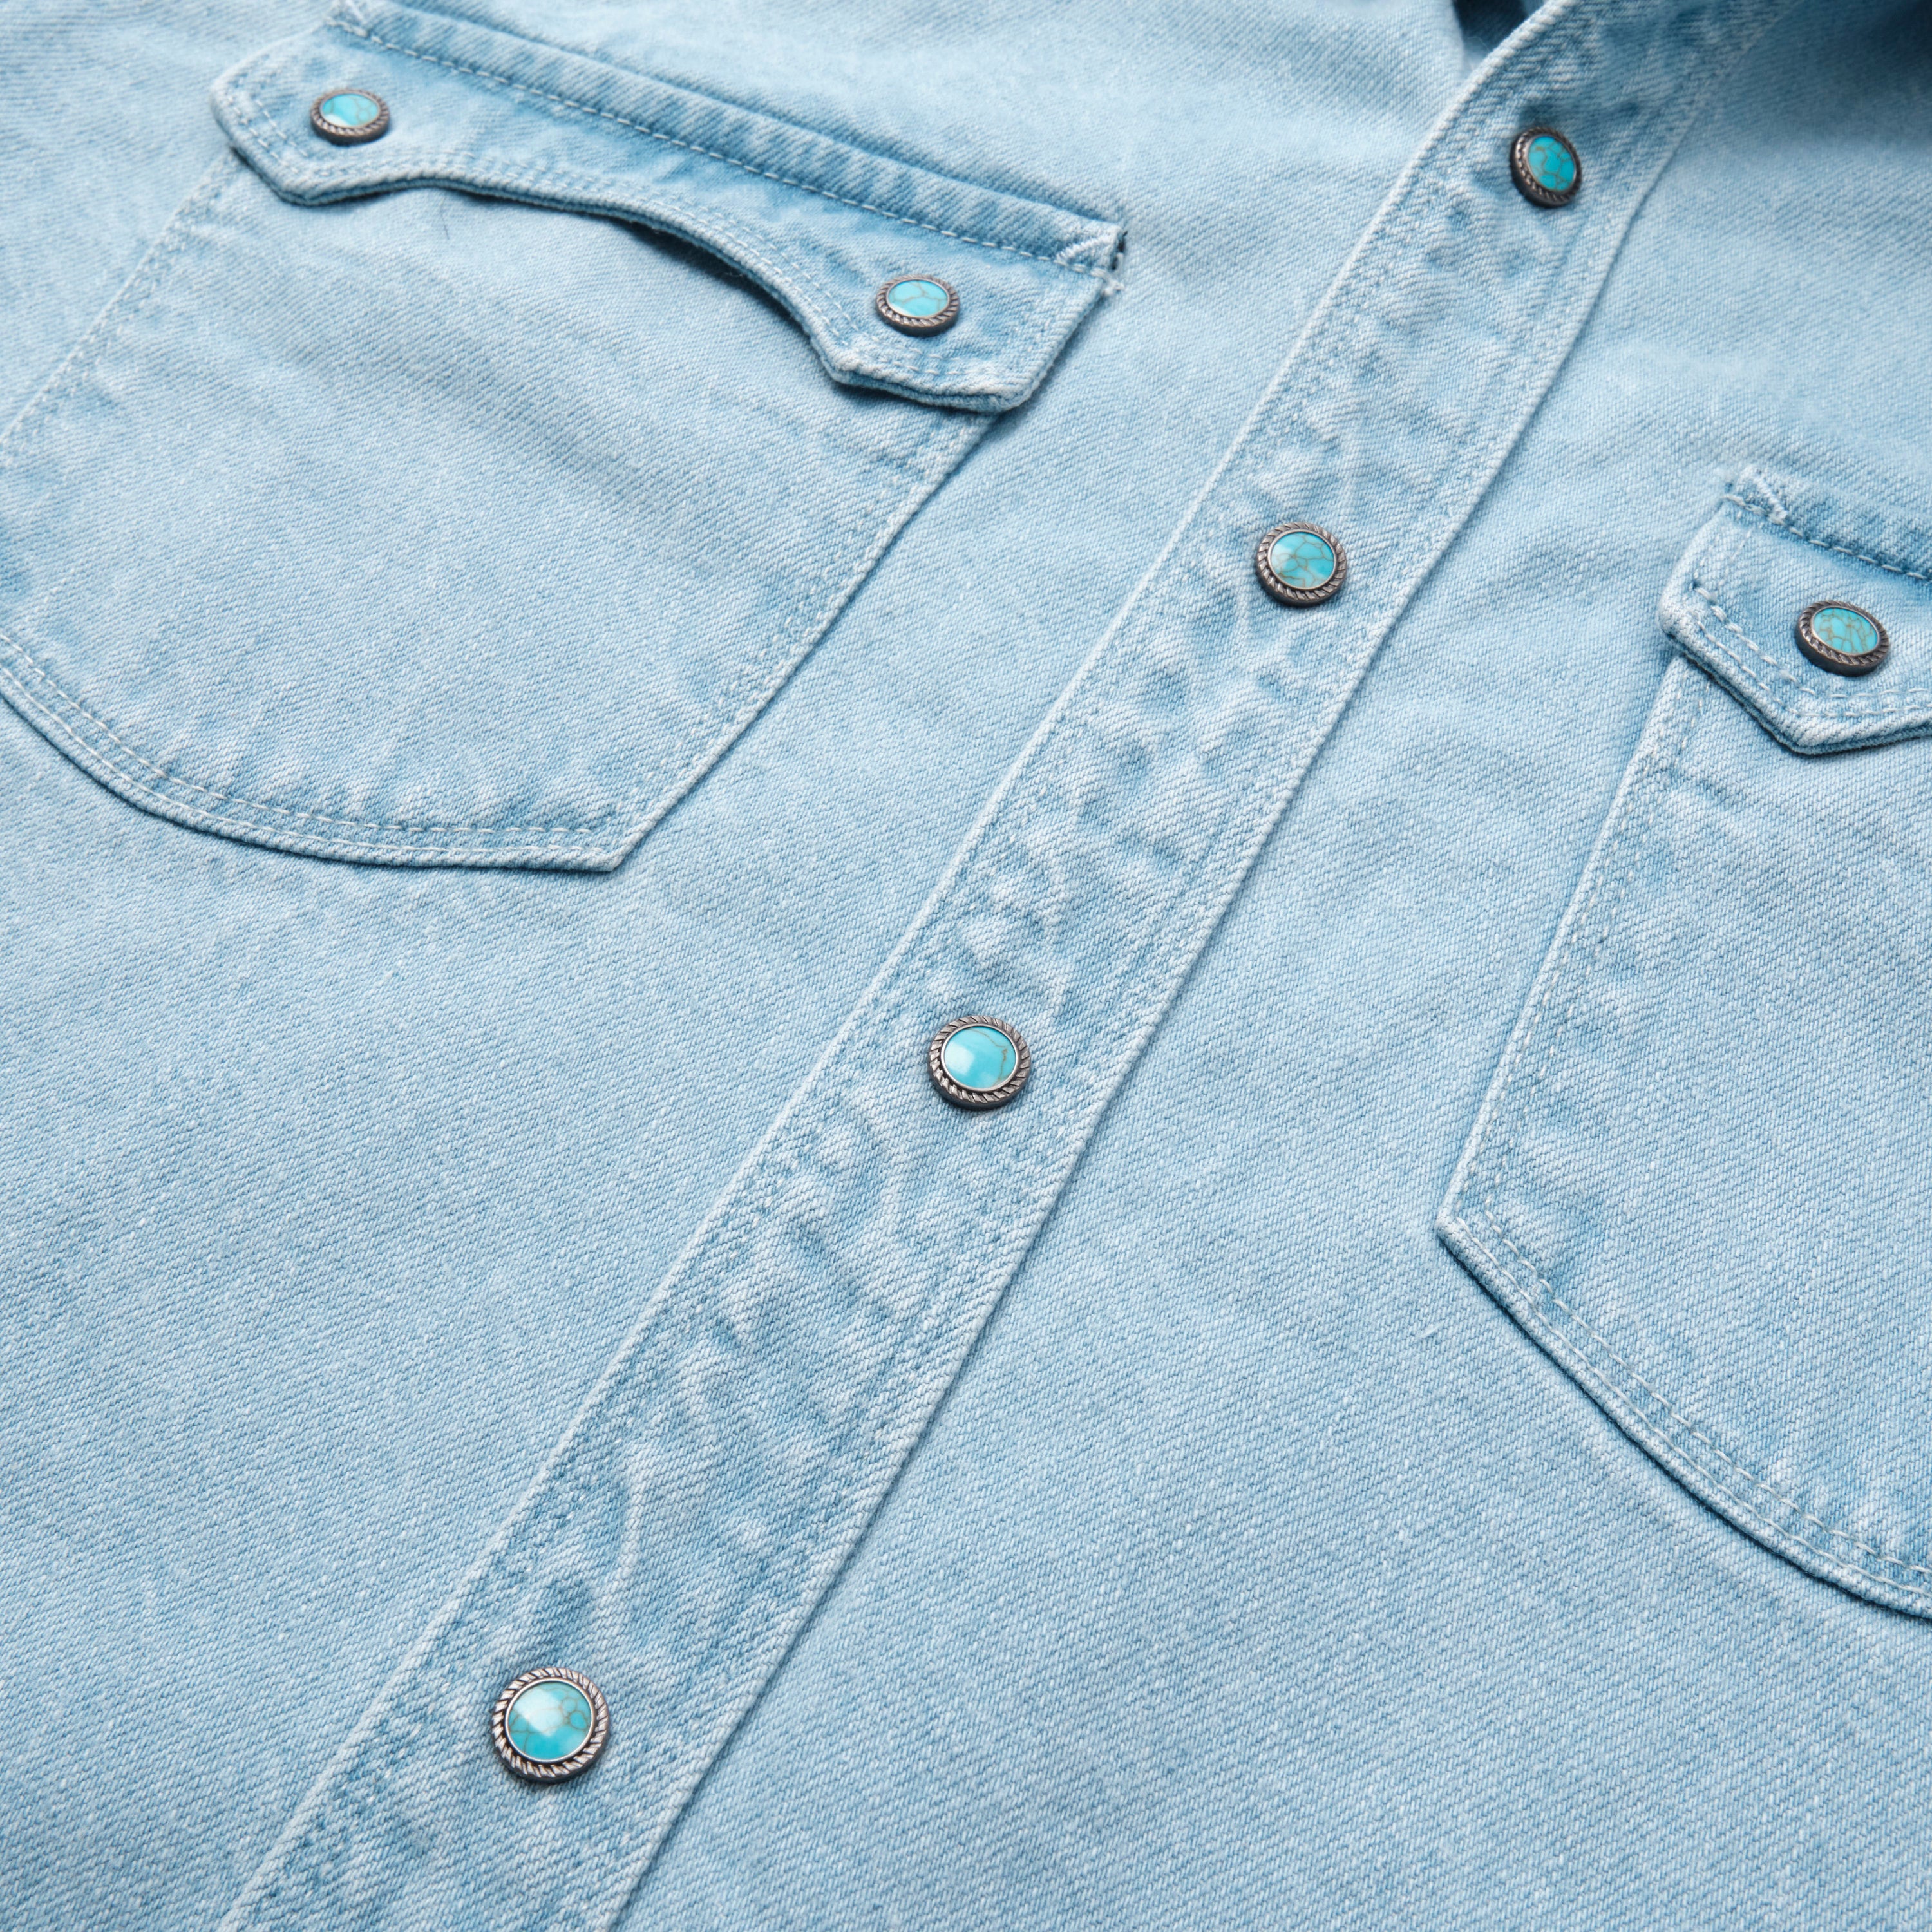 Freenote Cloth Western Turquoise Pearlsnap Selvedge Denim Shirt - Bleached  | Long Sleeve Shirts | Huckberry